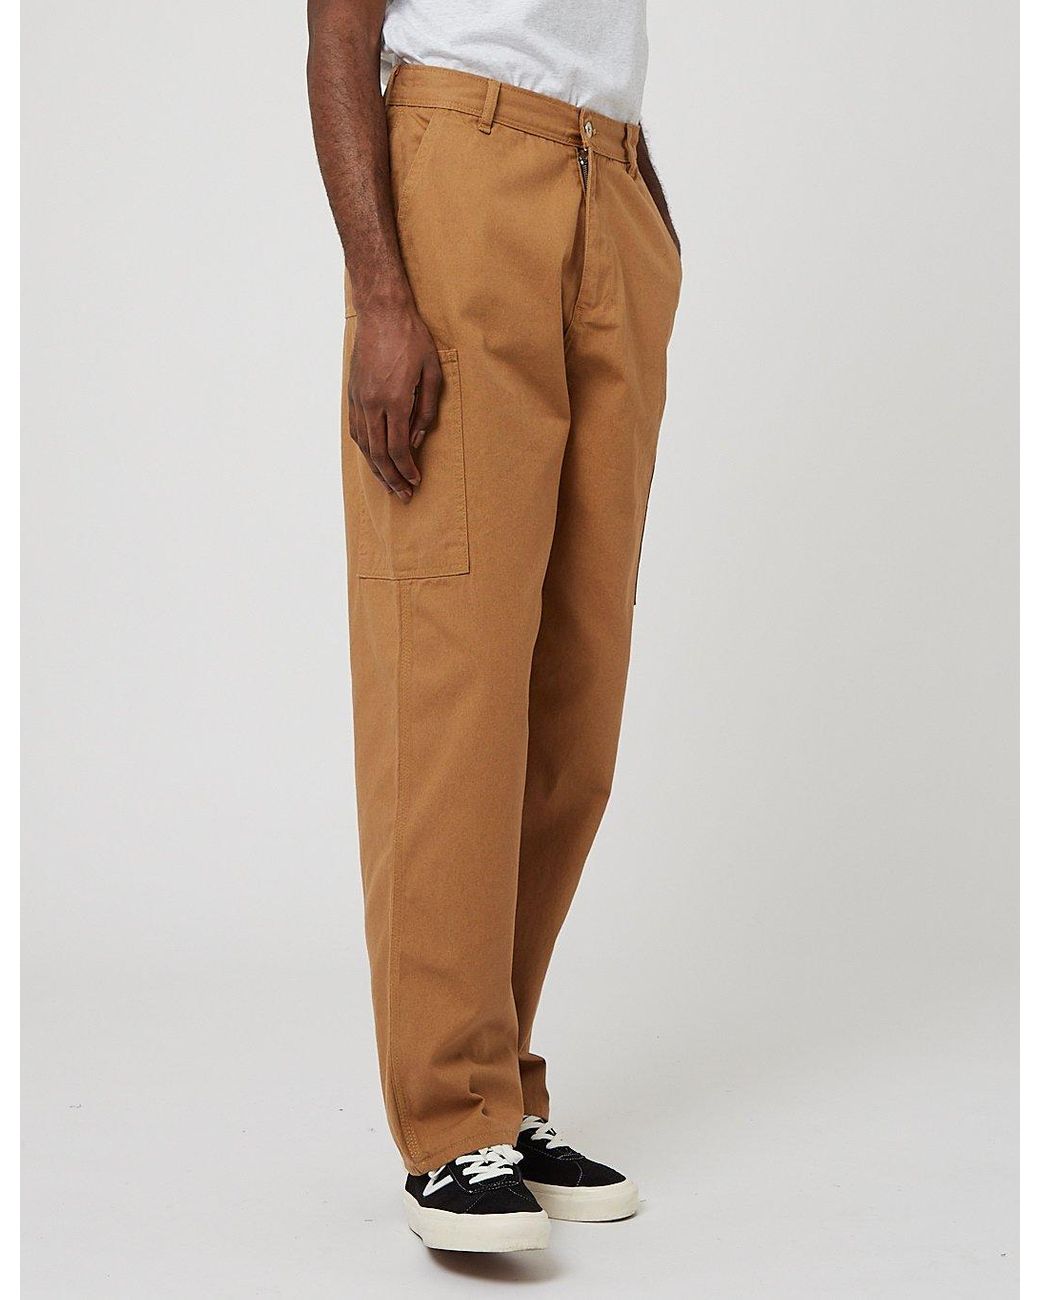 Stan Ray Cotton Tt Work Pant in Brown for Men - Lyst